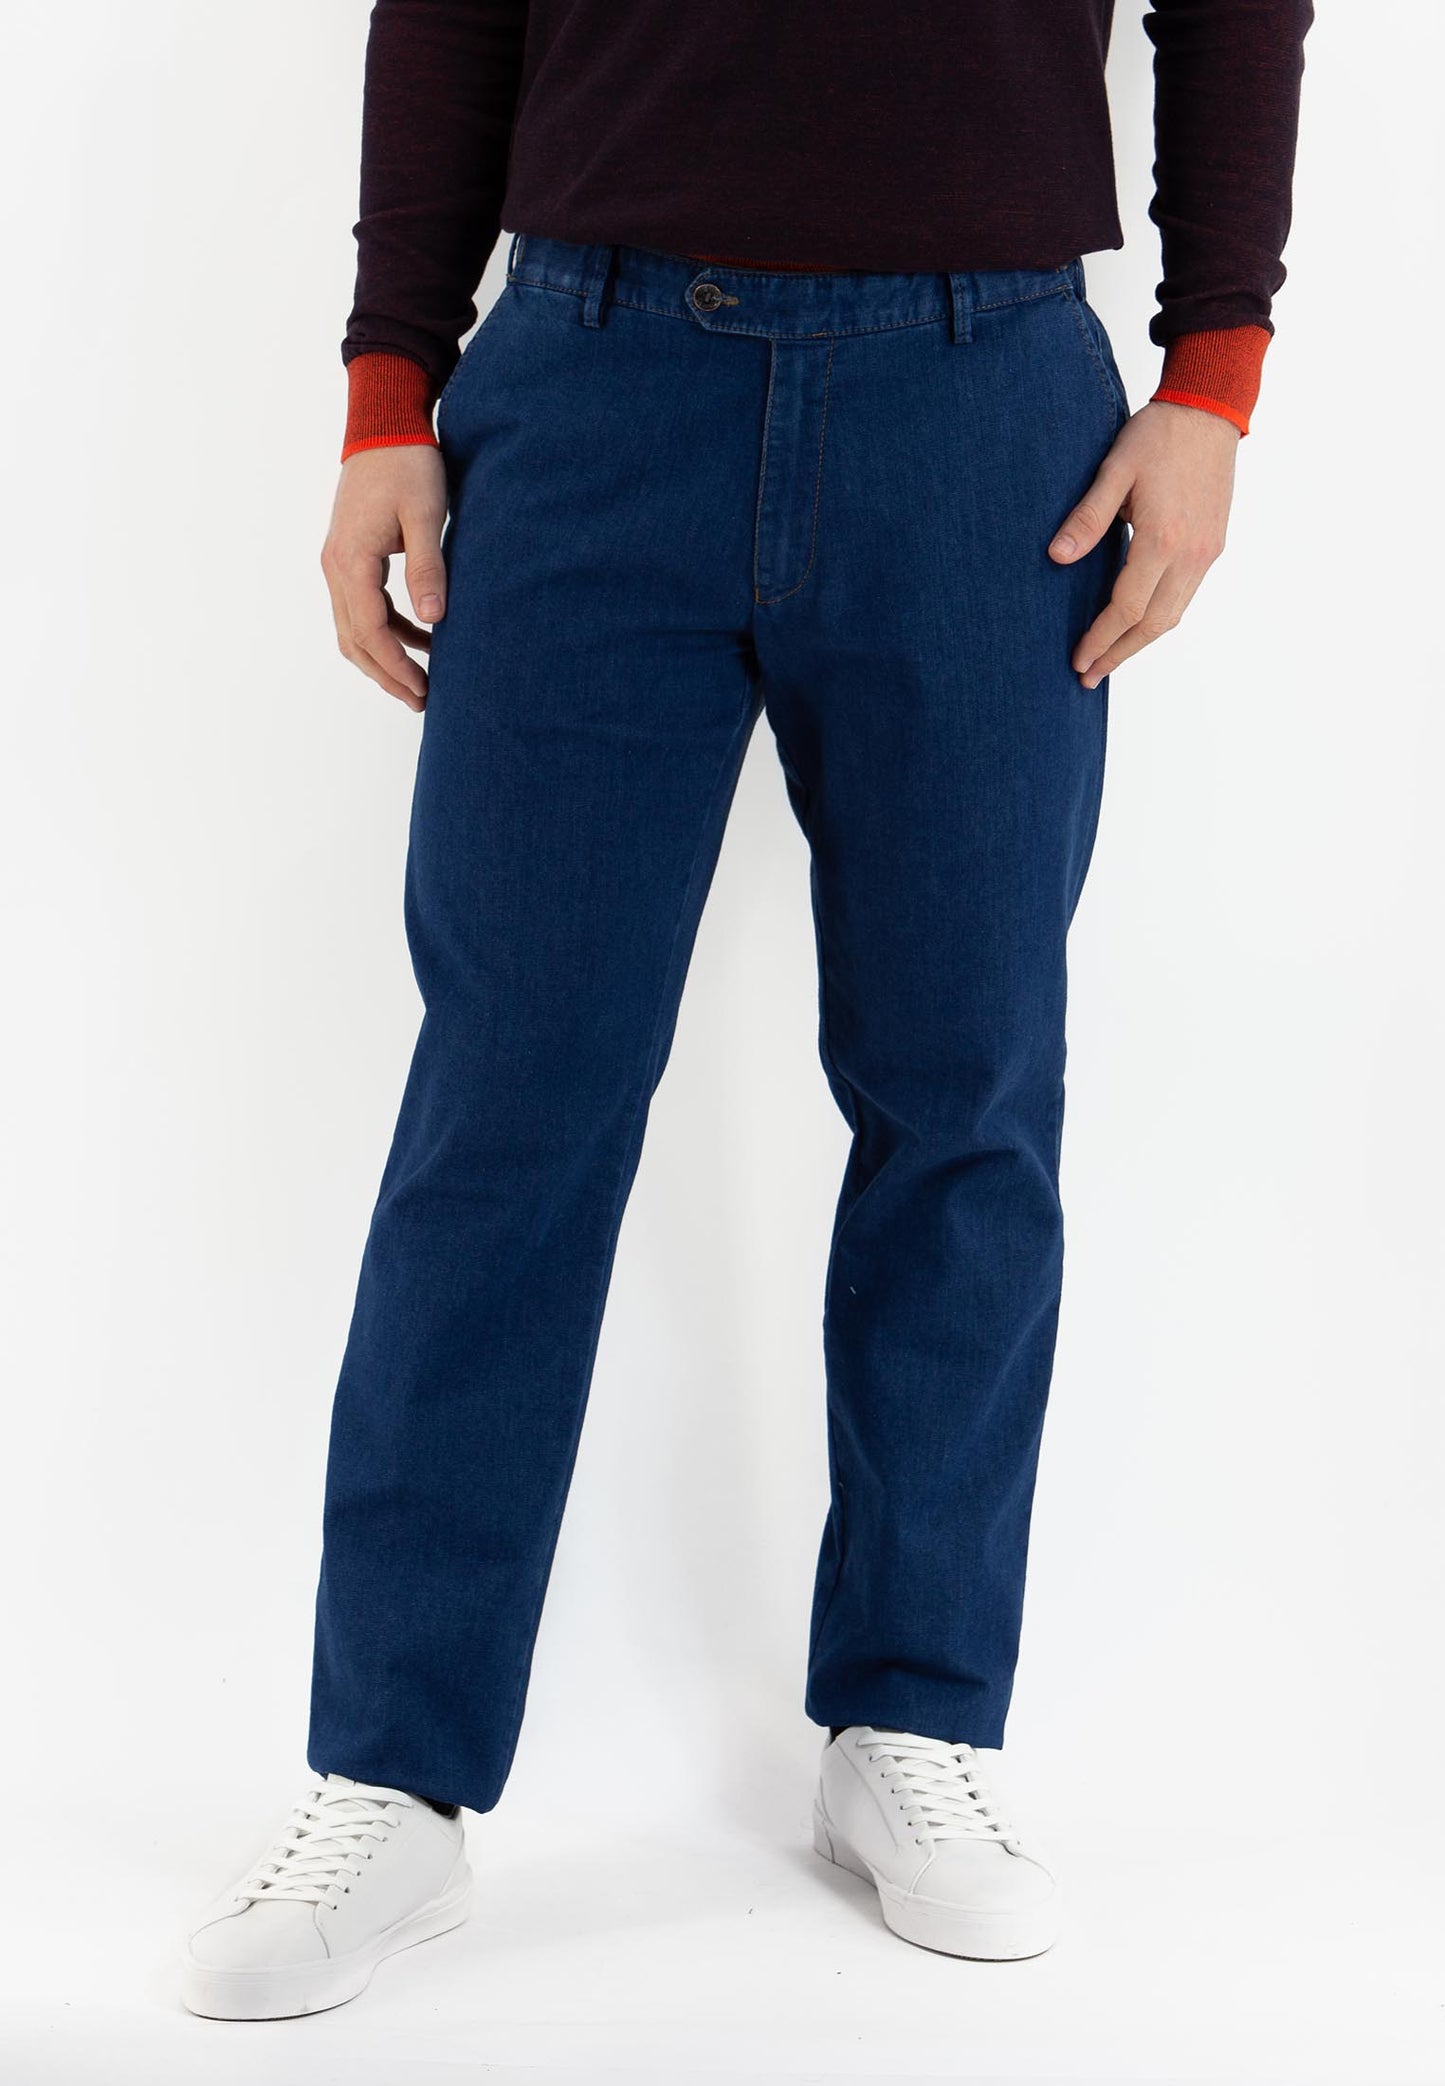 Pantalone chino in Jeans MEYER 4122 OSLO-SS23